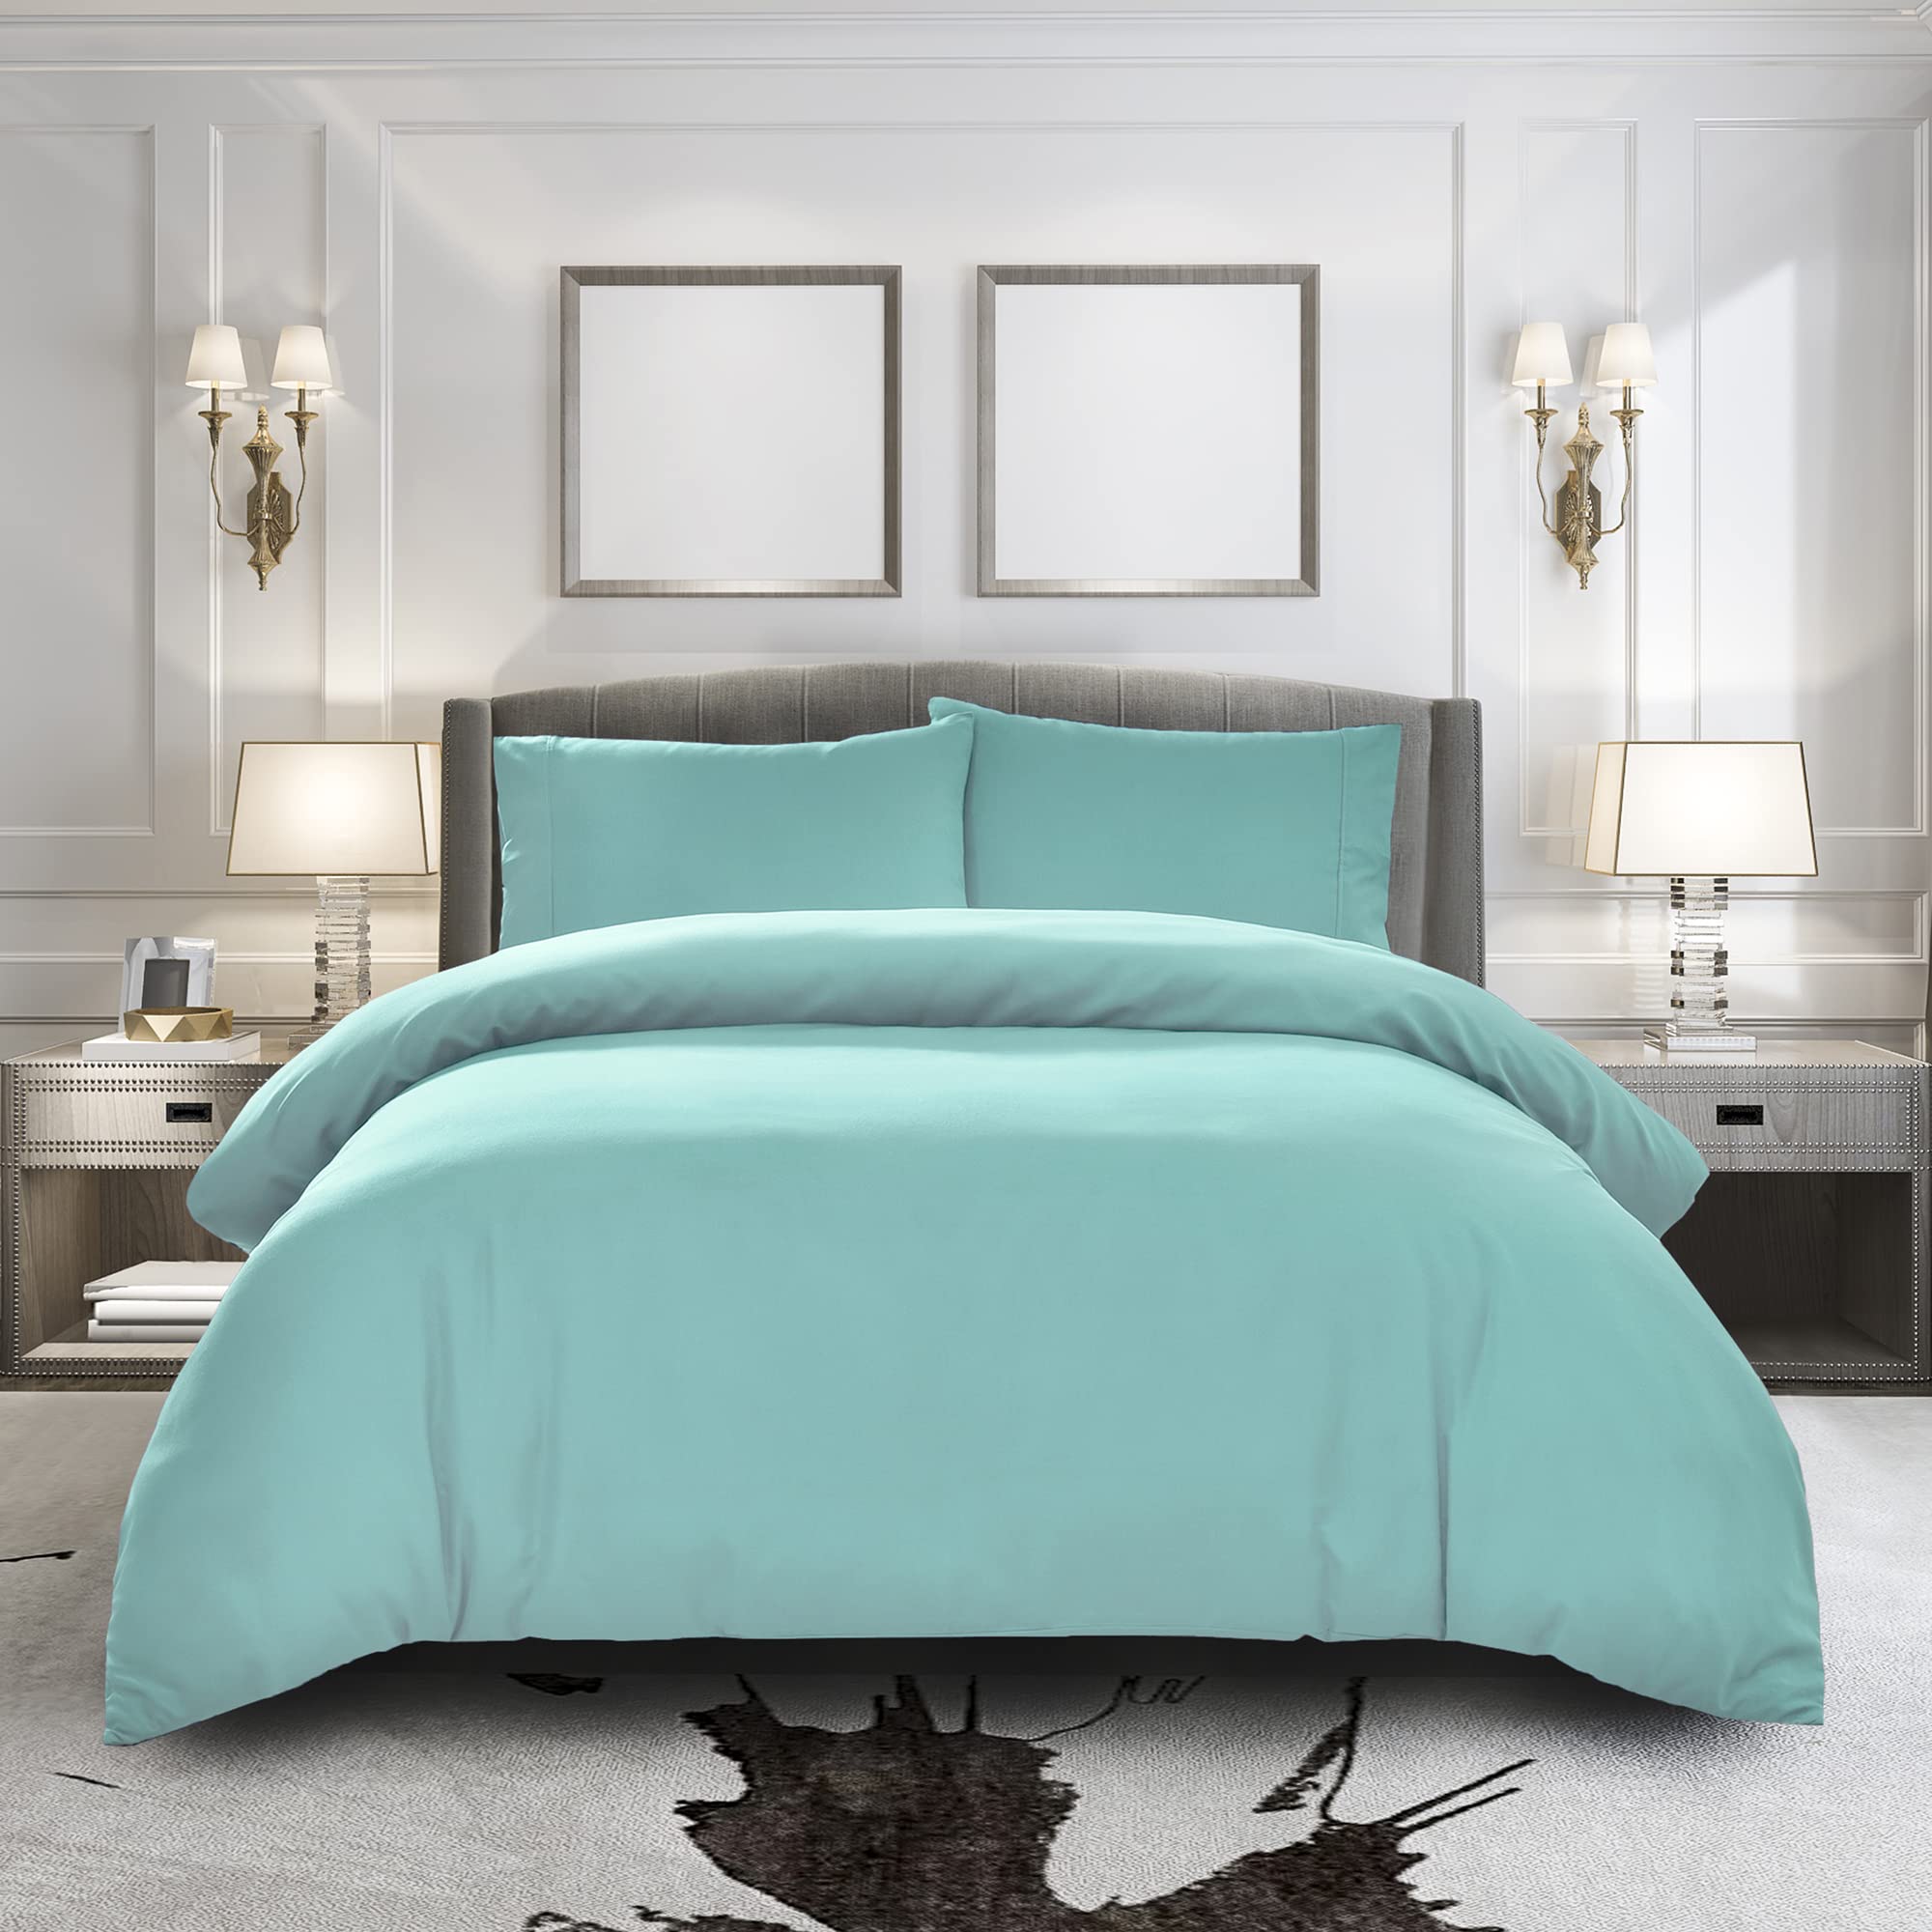 Pure Bedding Duvet Cover Queen [3-Piece, Aqua] - 1 Comforter Protector with Zipper Flap and 2 Pillow Shams - Hotel Luxury 1800 B